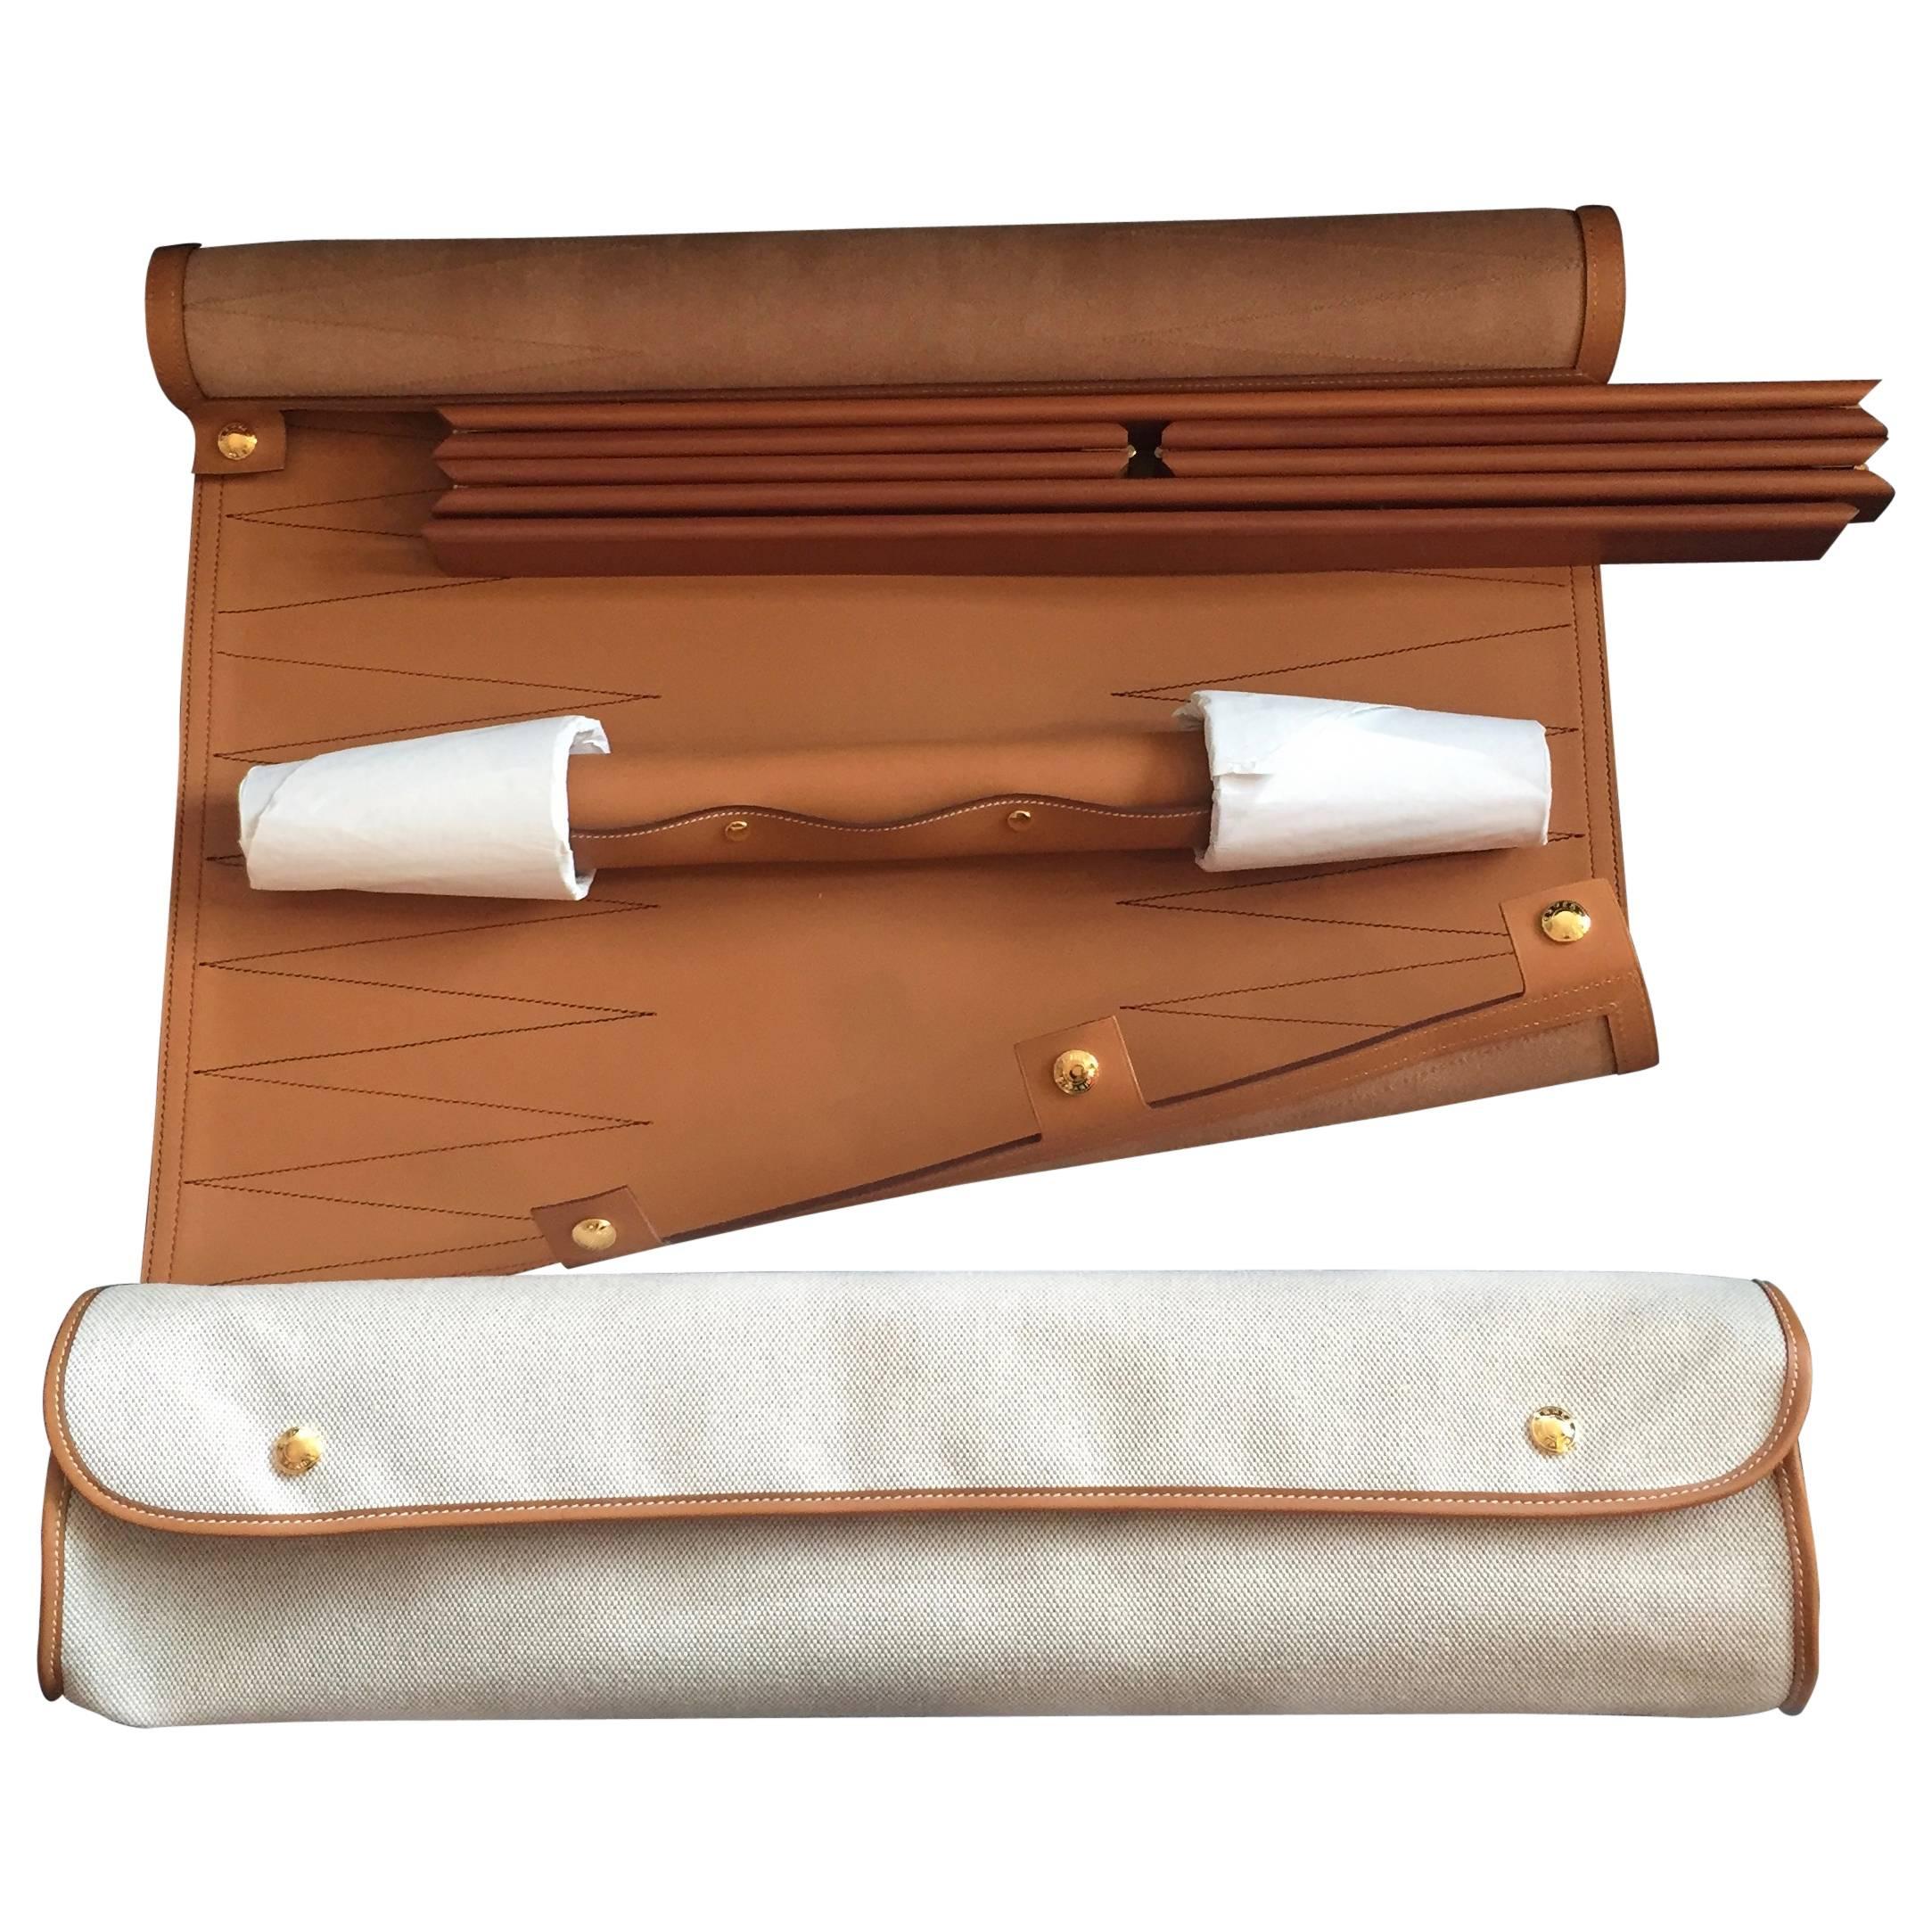 Hermes Backgammon Set in Natural Leather and Beechwood, Still Boxed, Never Used